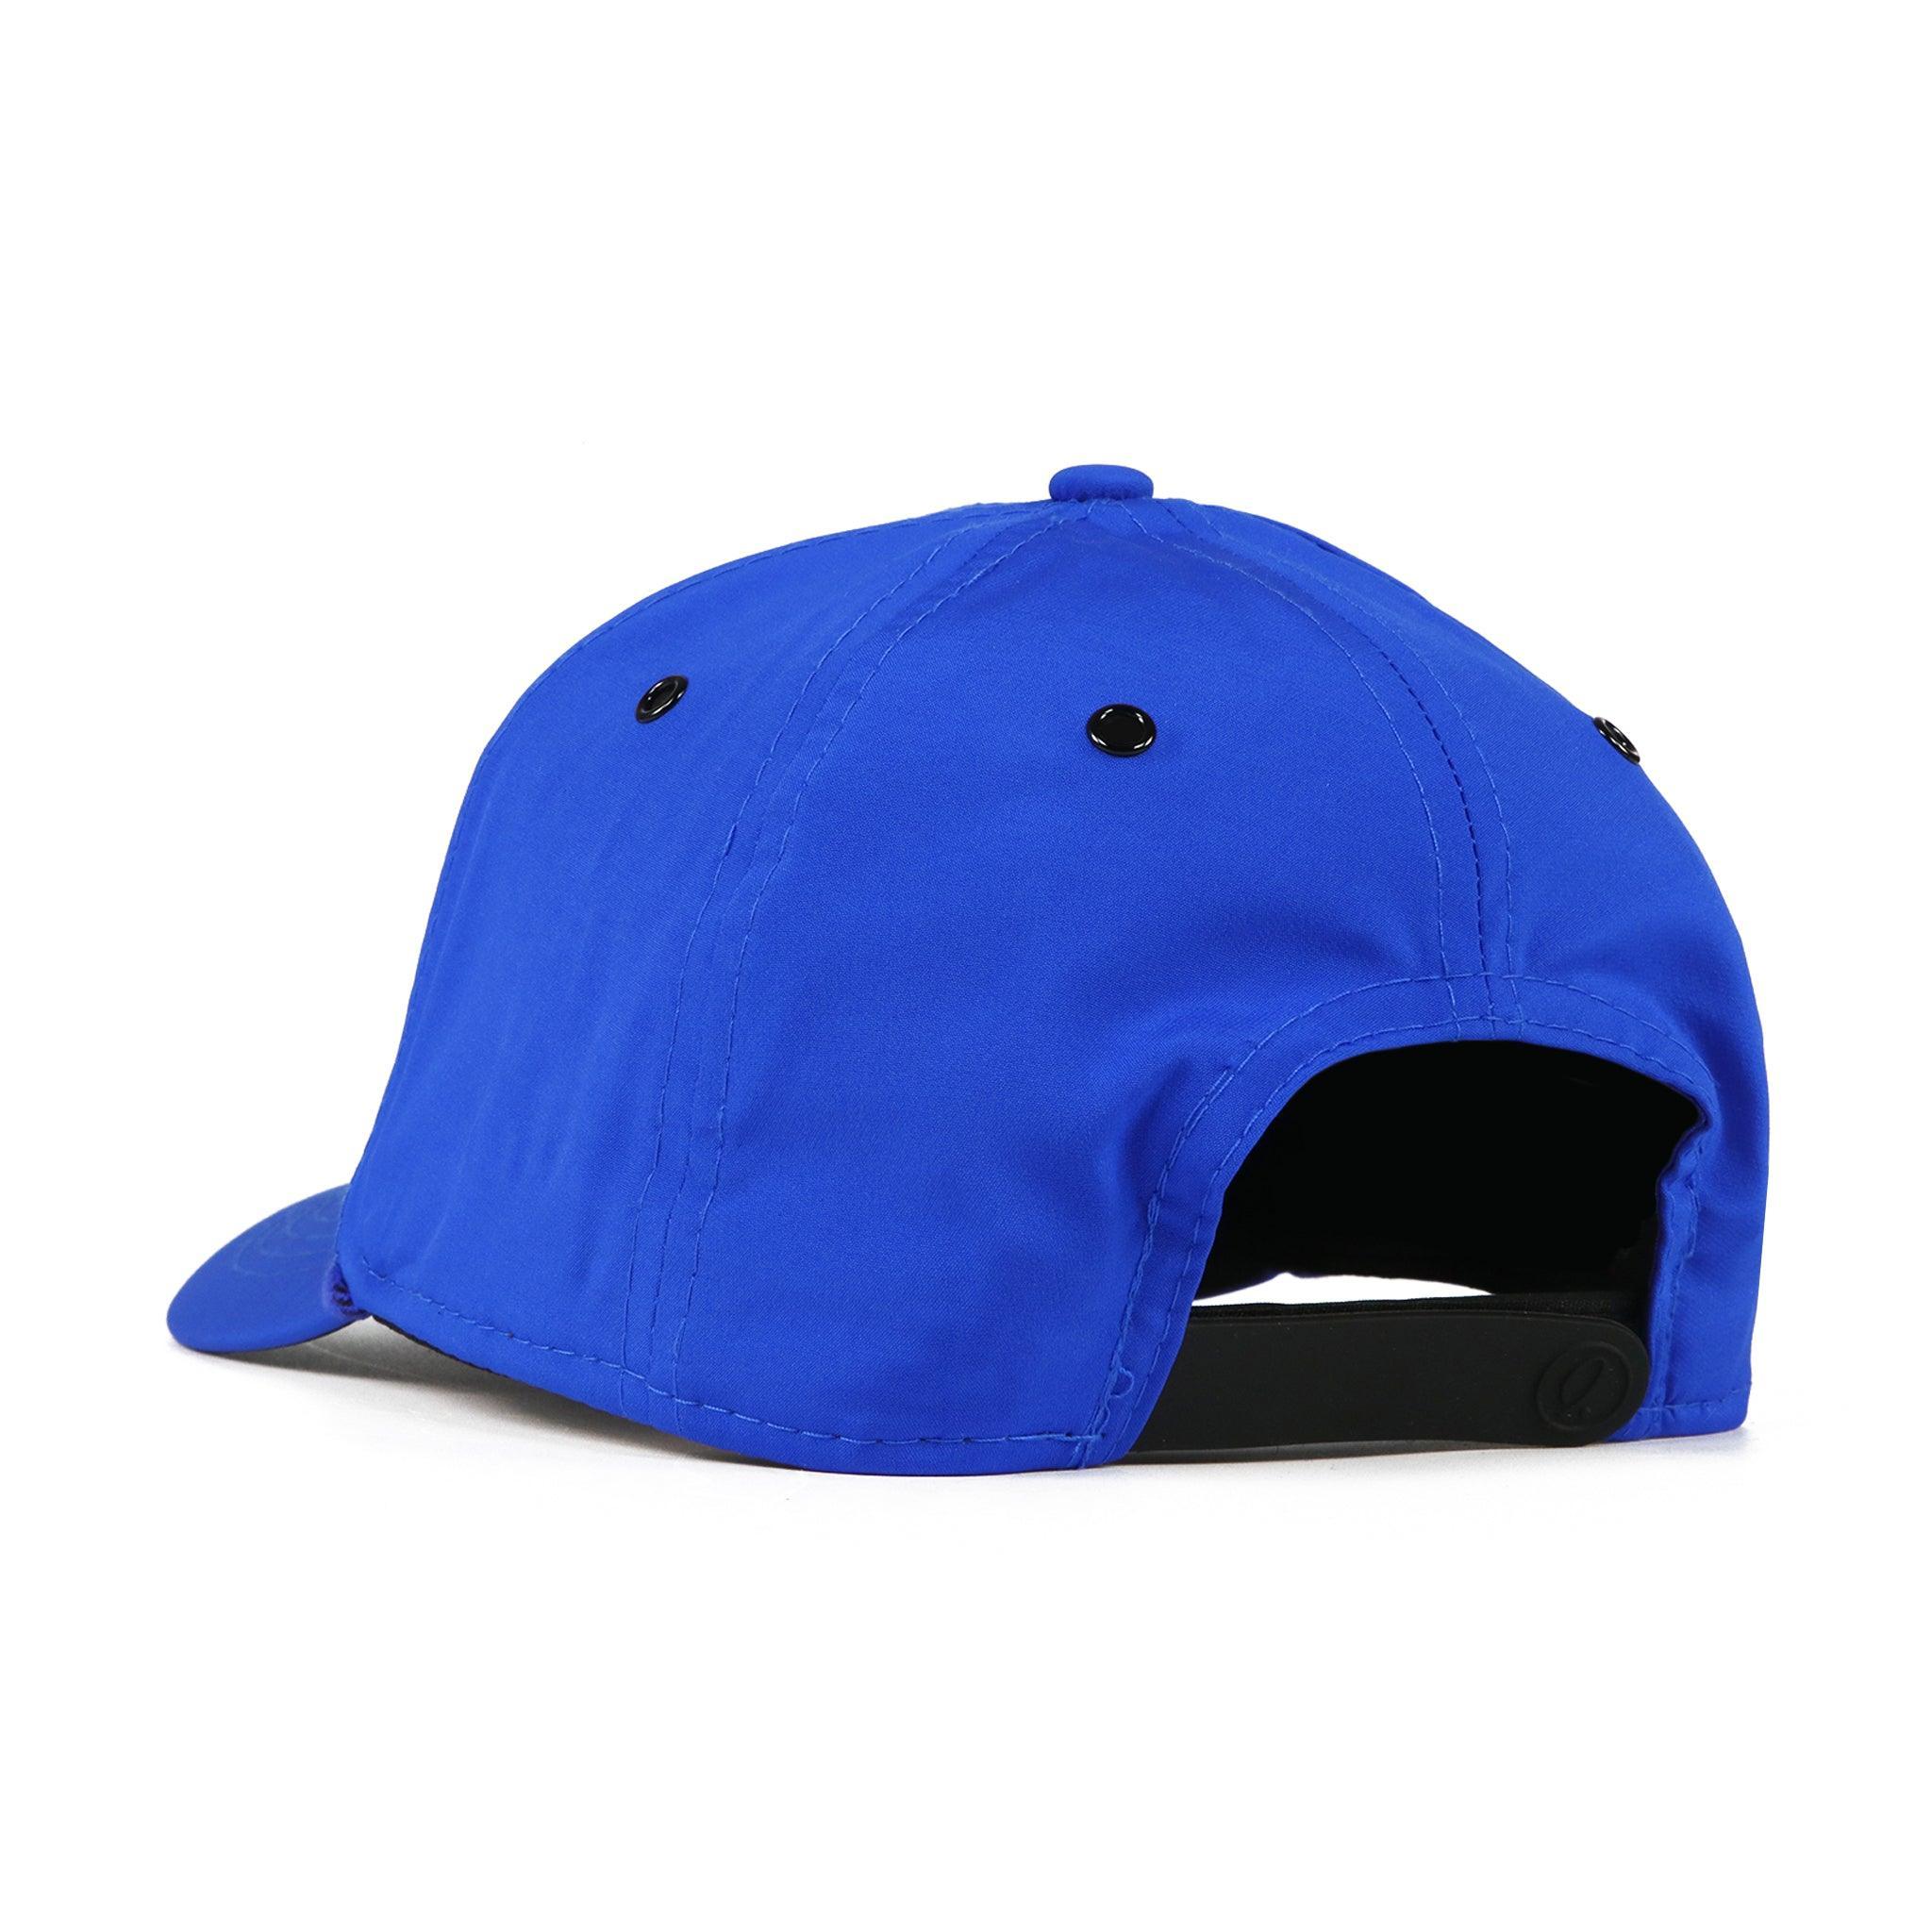 Natural Light Royal Blue Hat - The Beer Gear Store